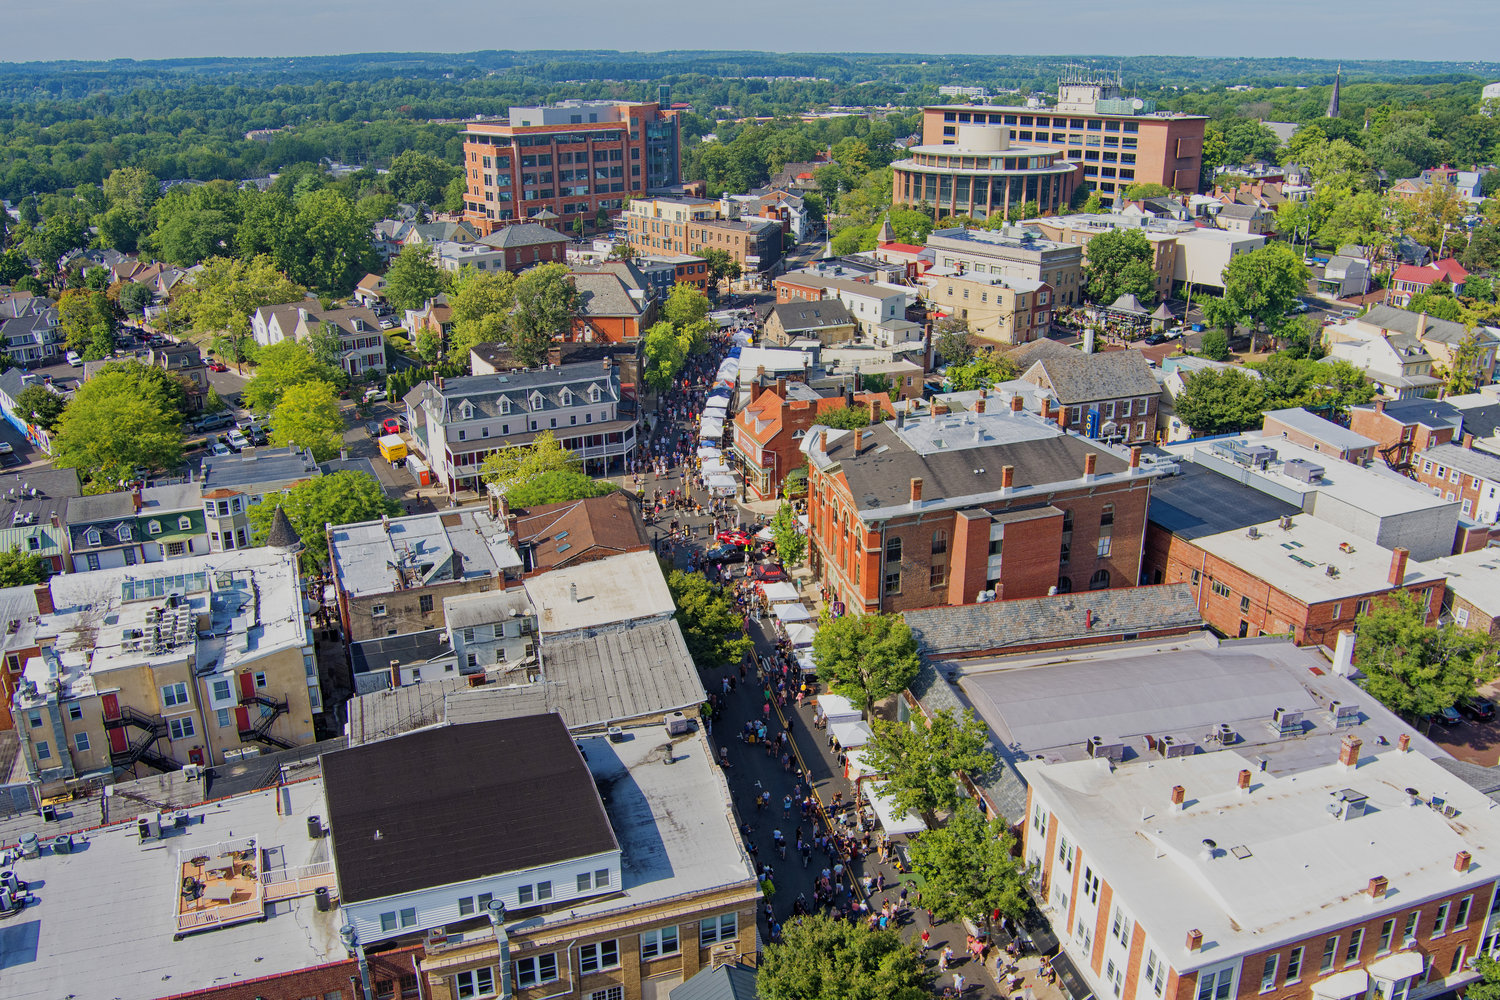 An aerial view of the  Doylestown Arts Festival, which celebrated 31 years of showcasing local and regional art and creativity Sept. 10 and 11.